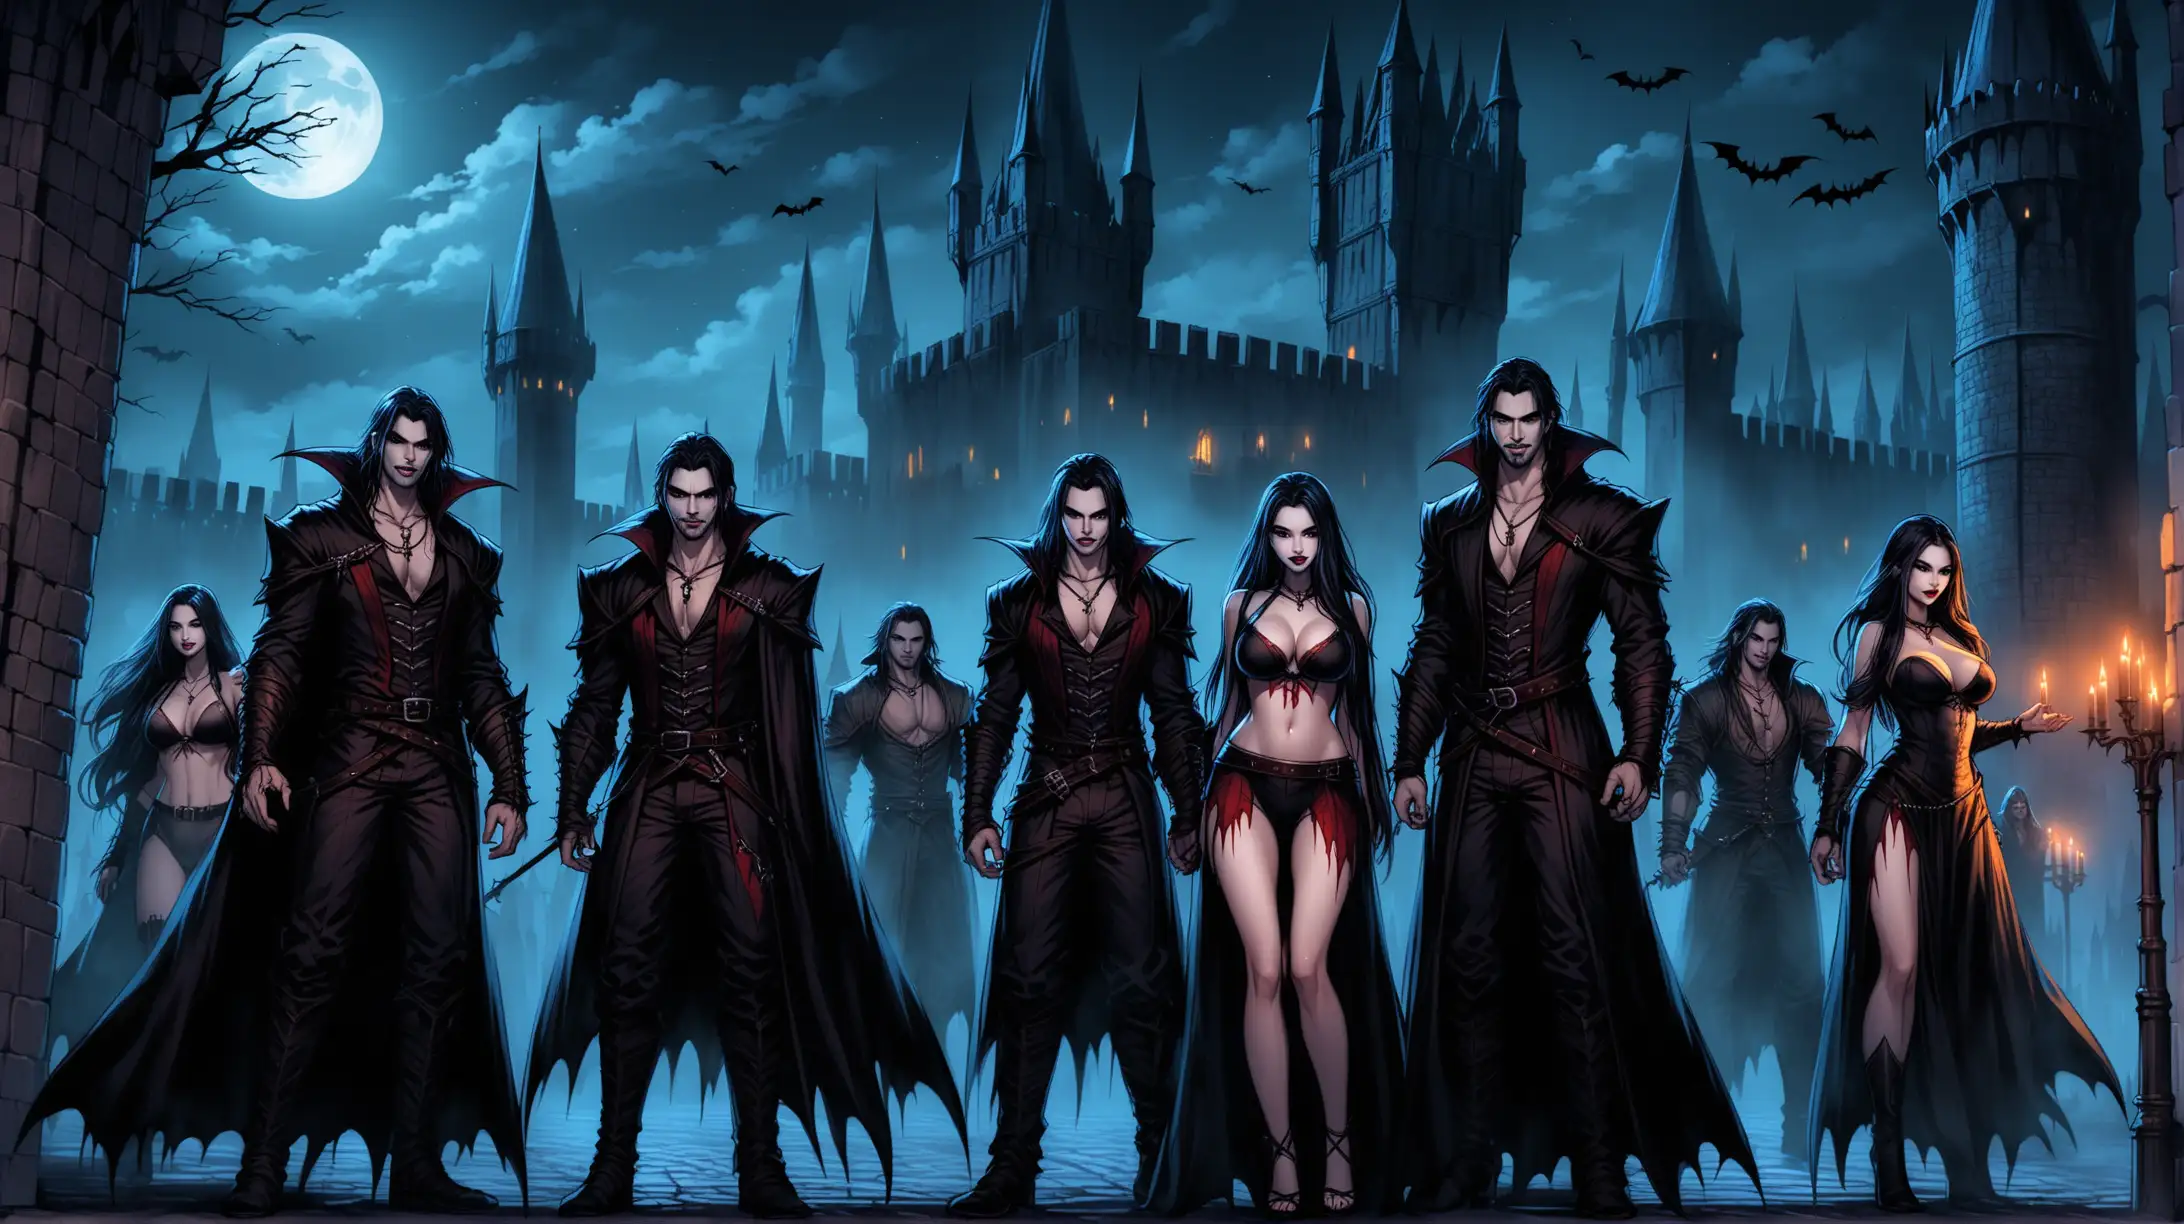 Medieval Fantasy Gothic Towers with Sexy Male and Female Dhampyr Half Vampires at Night